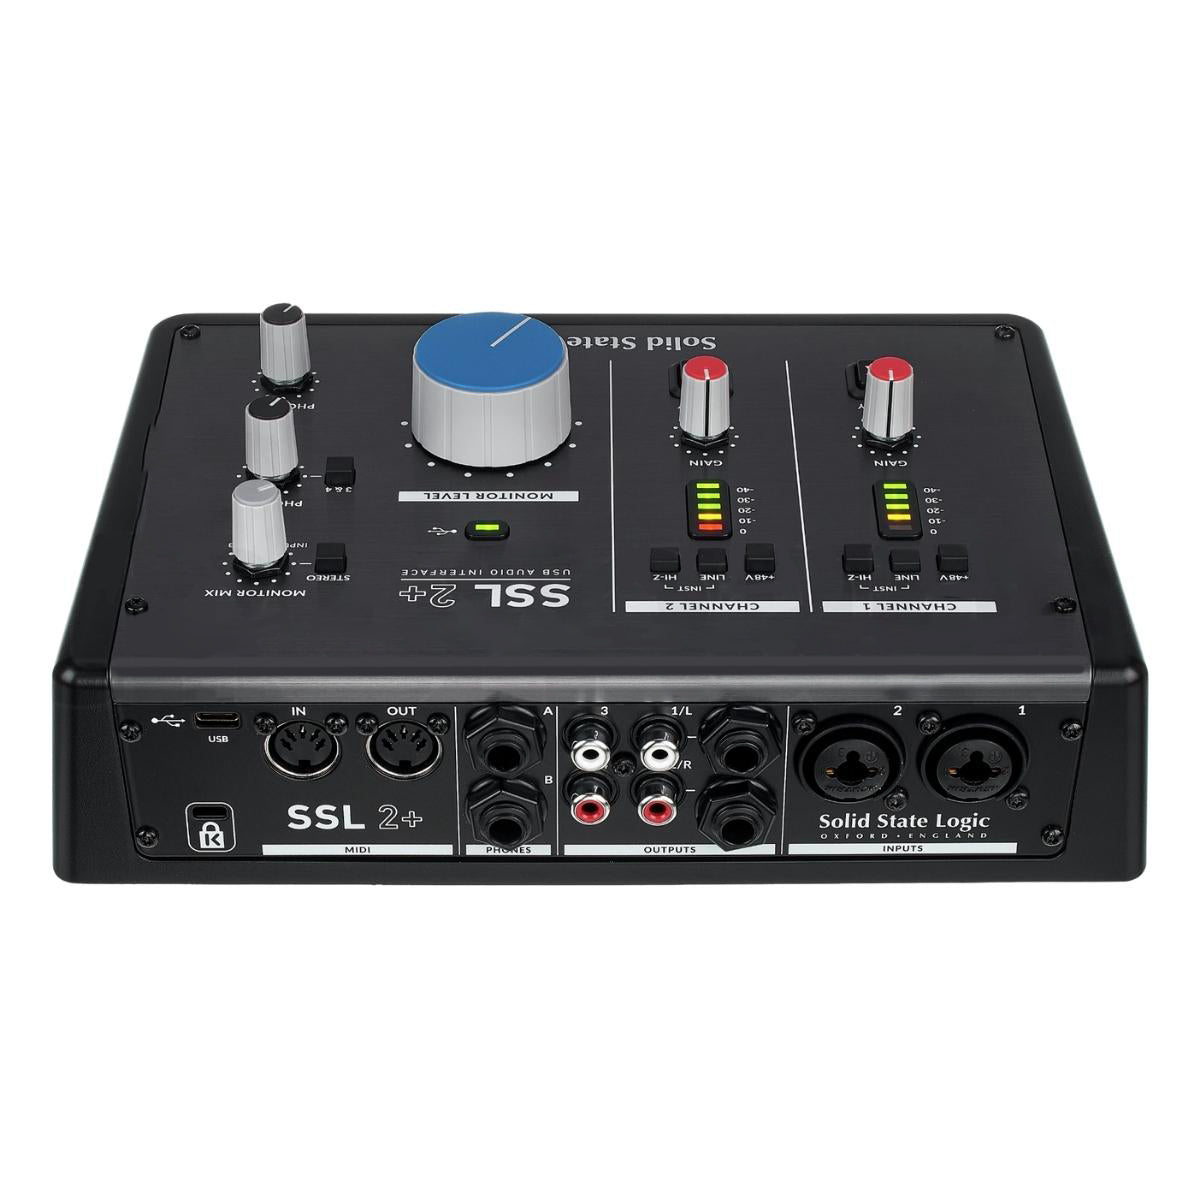 Solid State Logic SSL 2 / SSL 2+ Professional Desktop USB-C Audio Interface with Mic Preamps, 24-bit, Legacy 4K Button, Monitor Mix Control